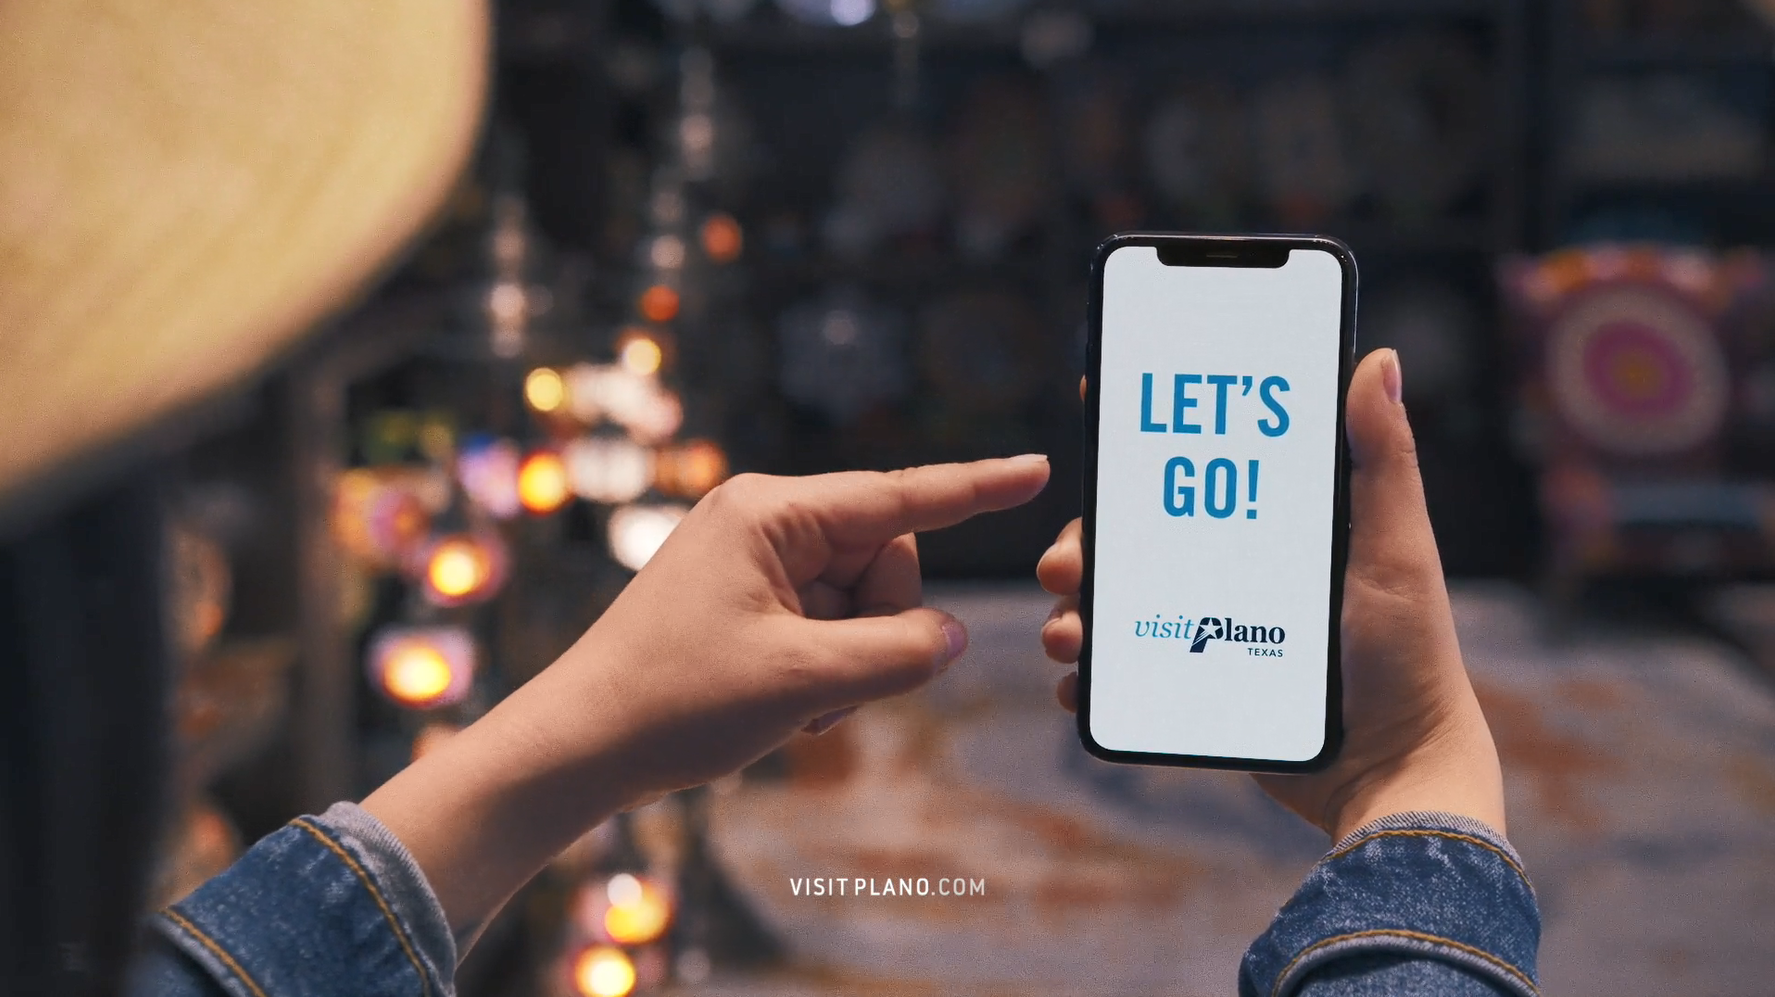 Let's Go and Visit Plano logoon mobile phone with girl pointing to phone